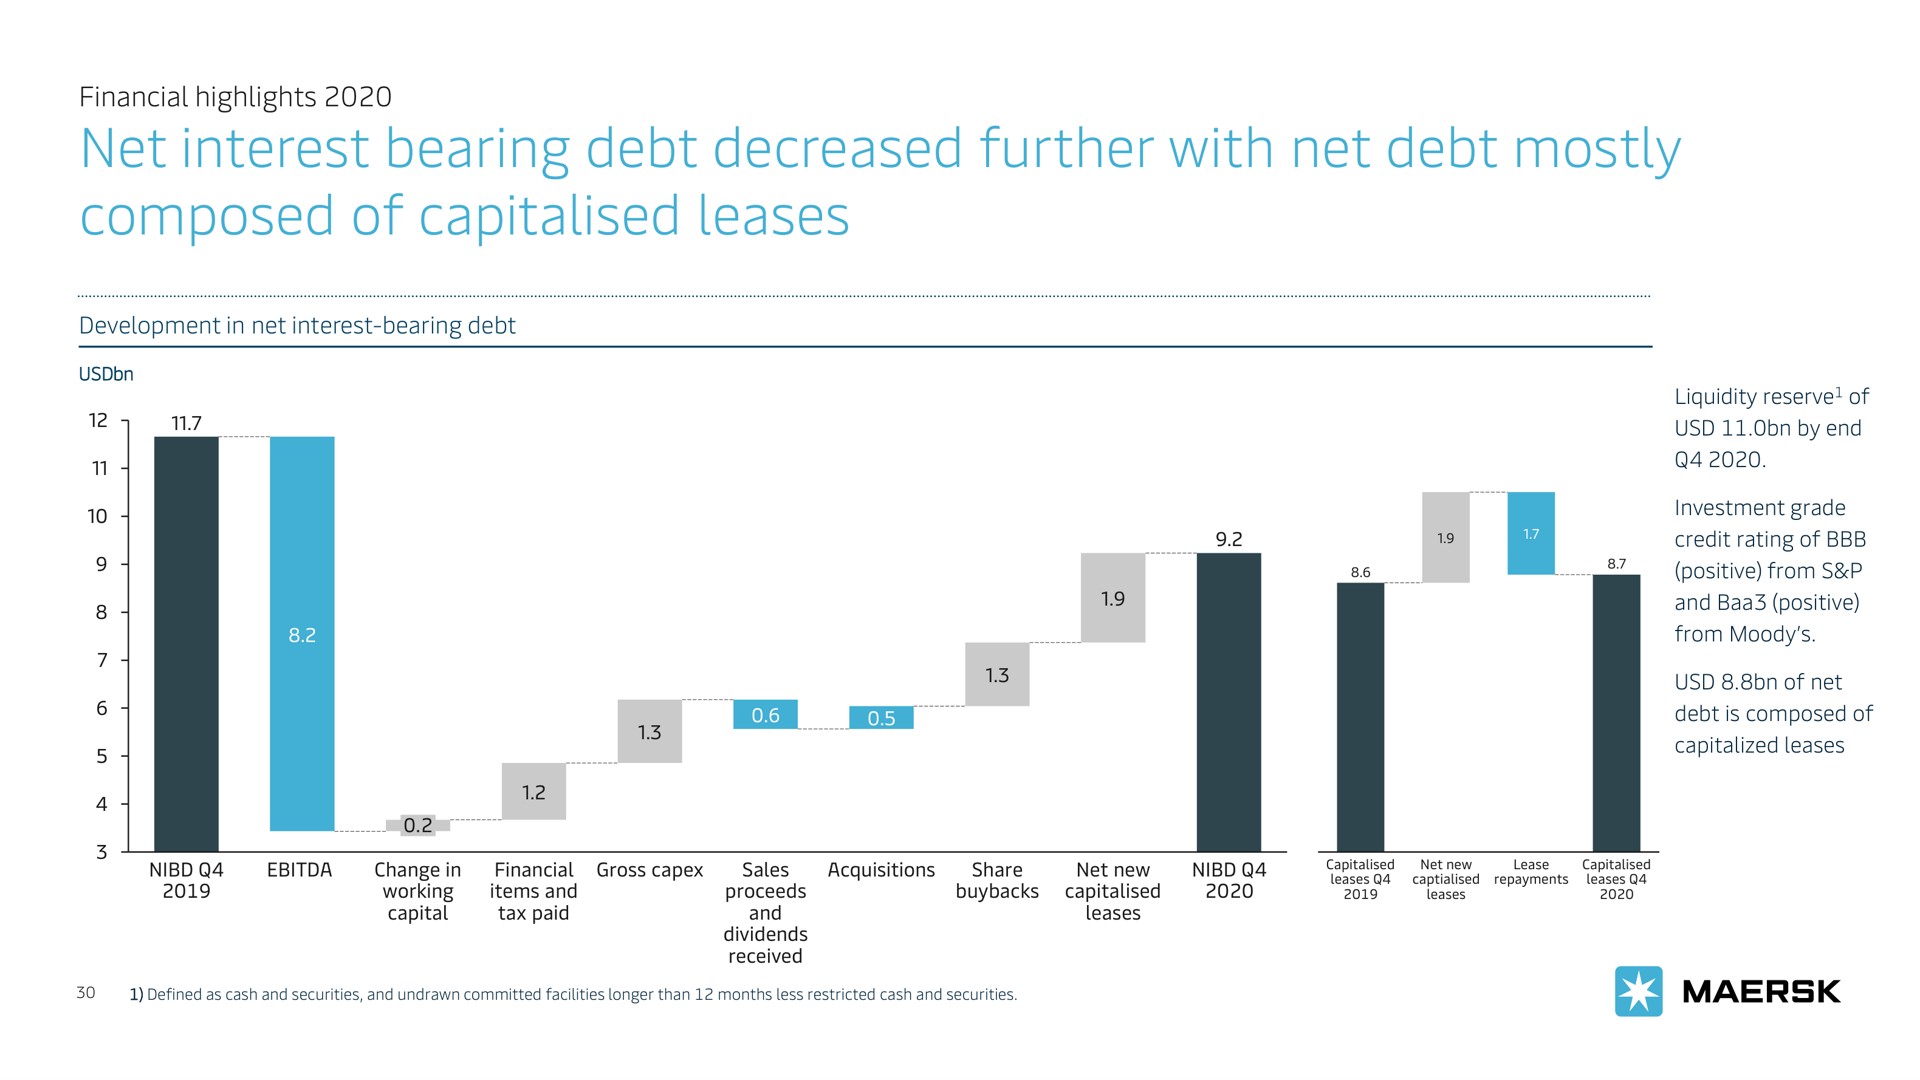 net interest bearing debt decreased further with net debt mostly composed of leases | Maersk